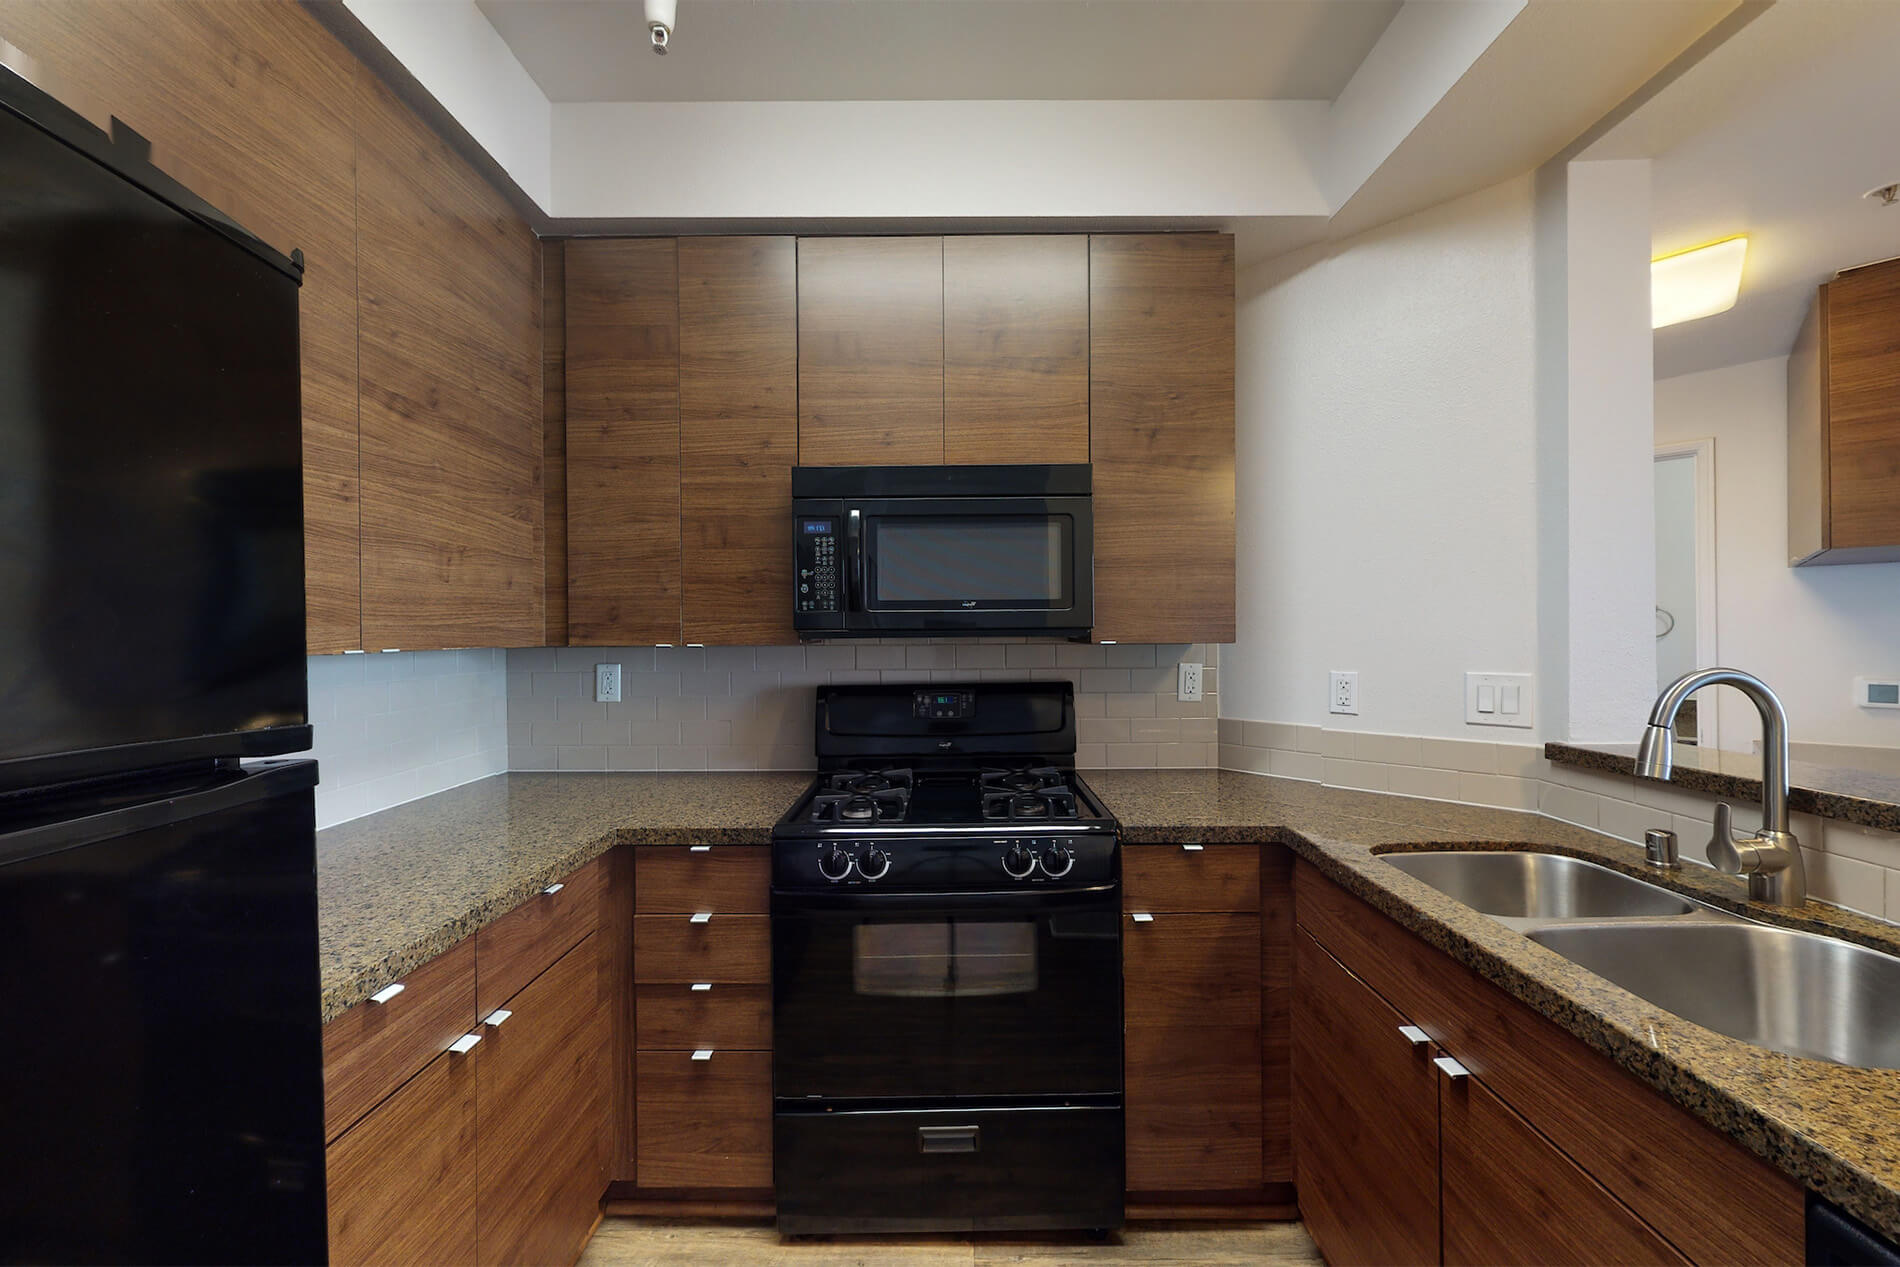 Westerly on lincoln espresso cabinets in kitchen